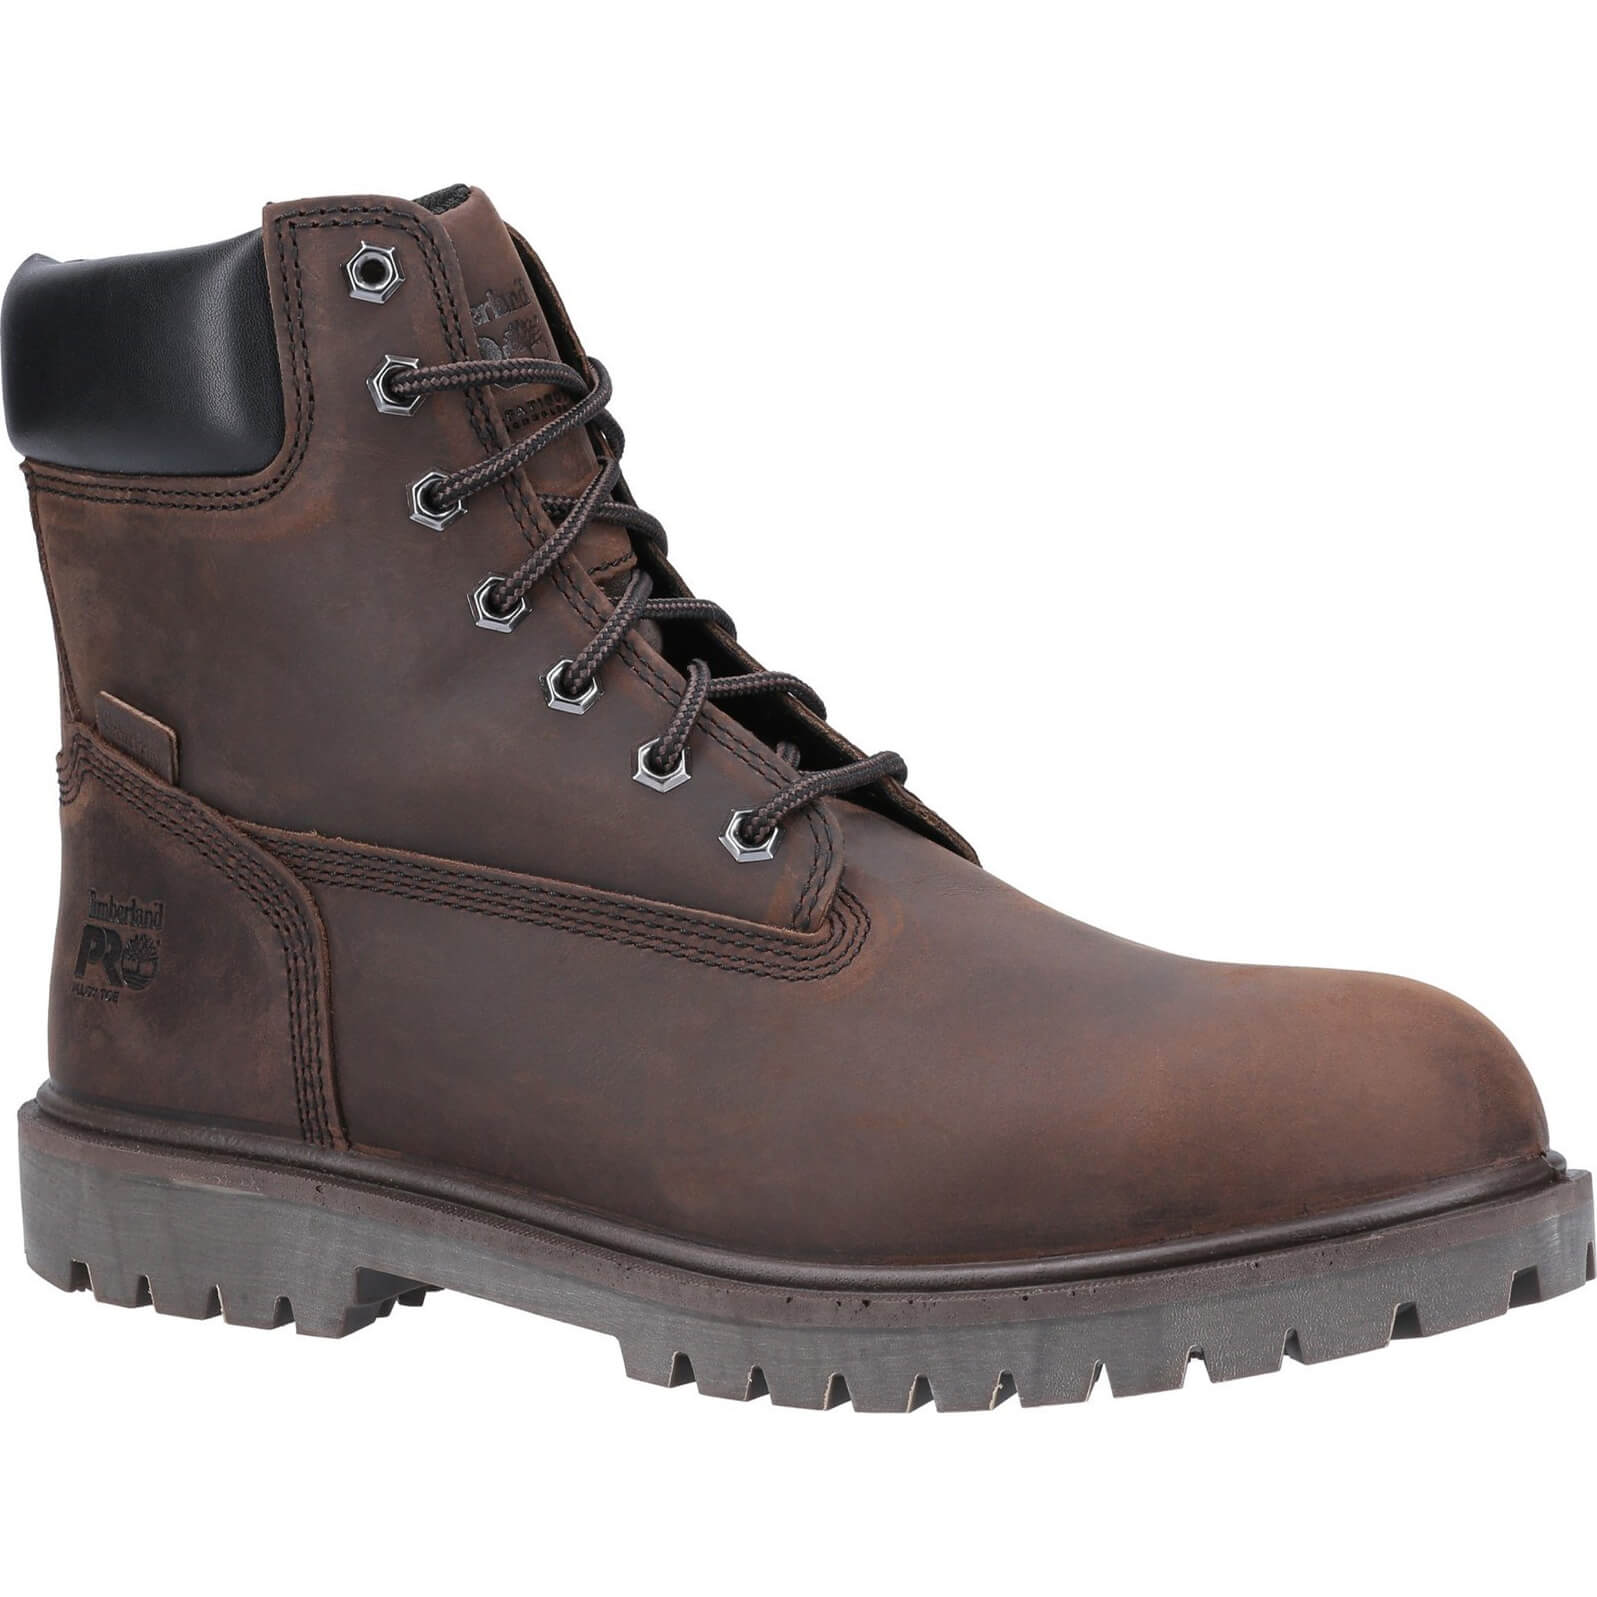 Image of Timberland Pro Iconic Safety Toe Work Boot Brown Size 11